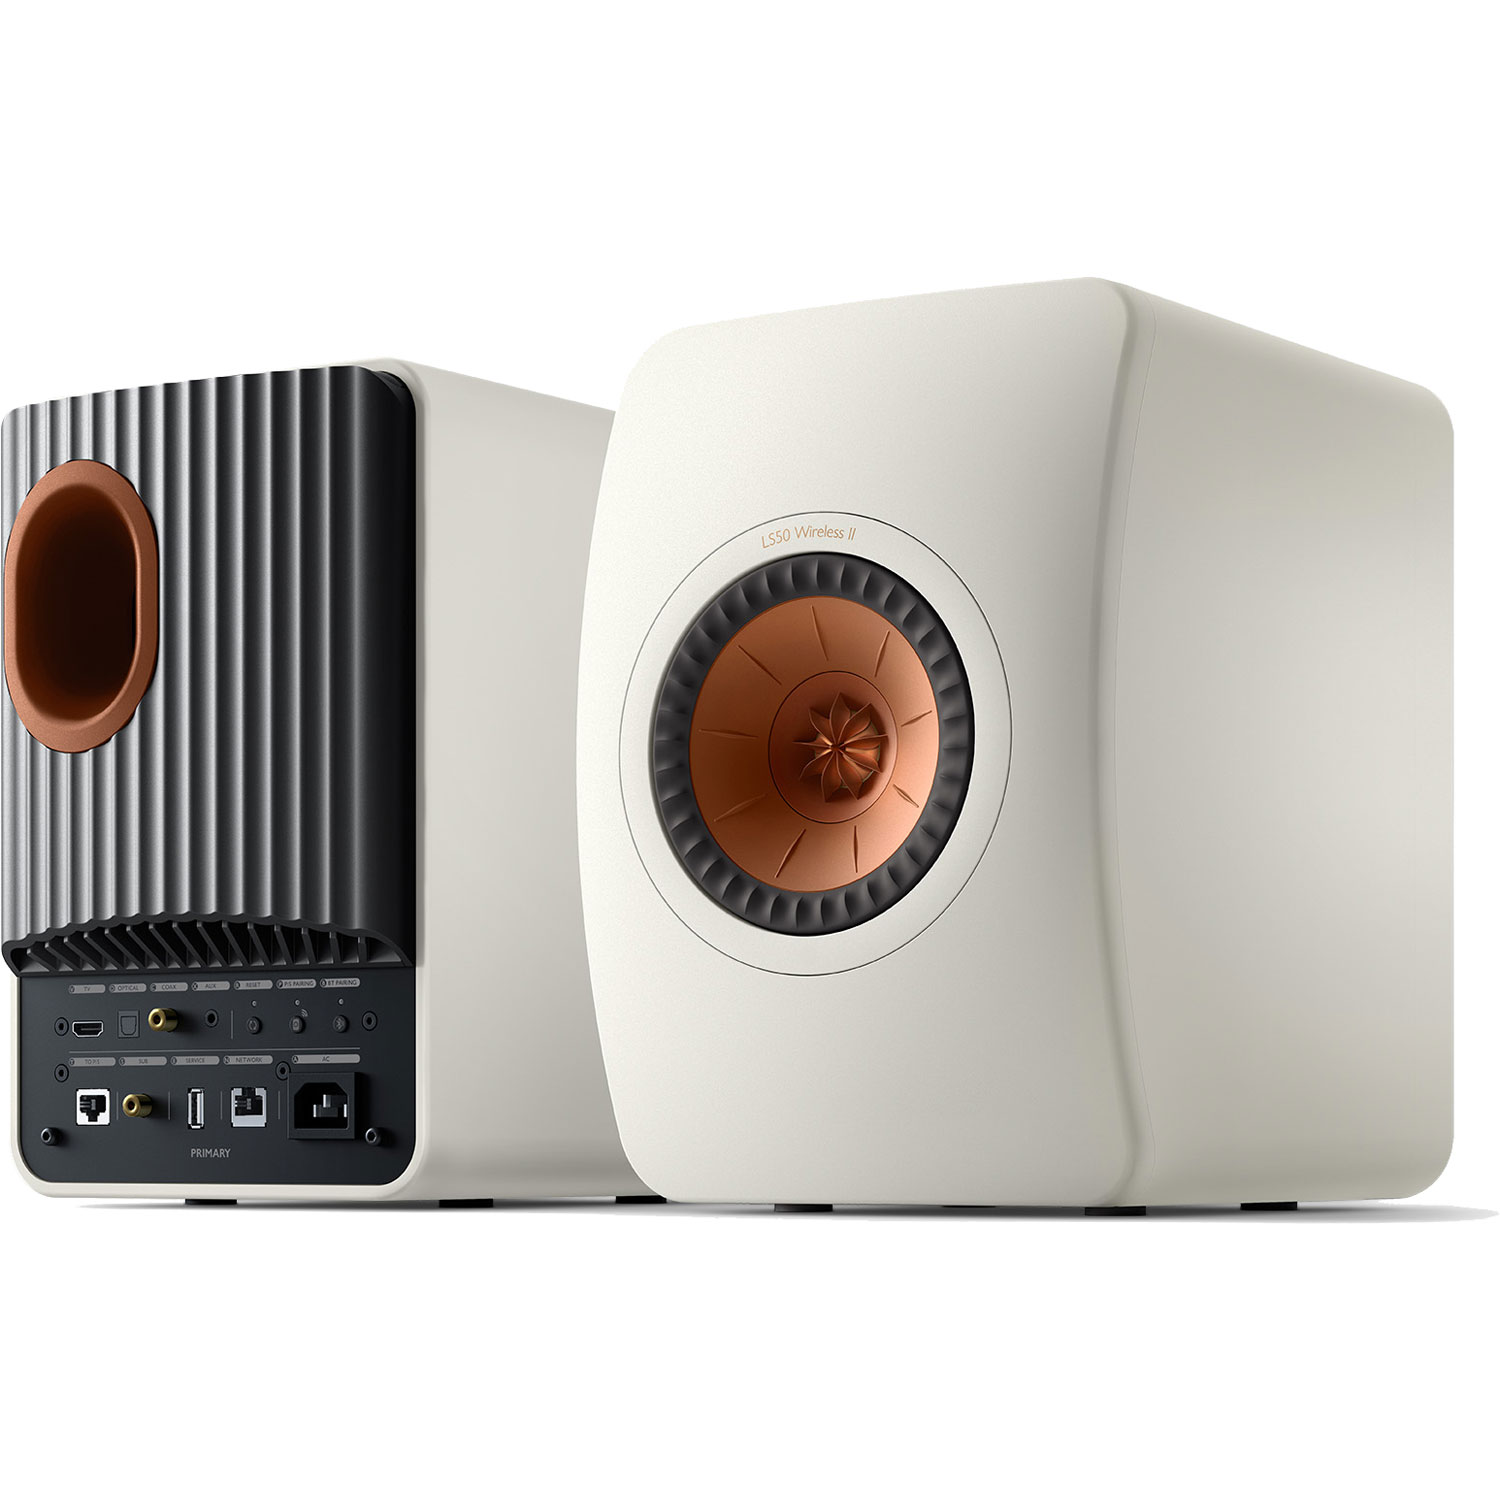 KEF LSX PAIR Wireless Music System White | Accessories4less